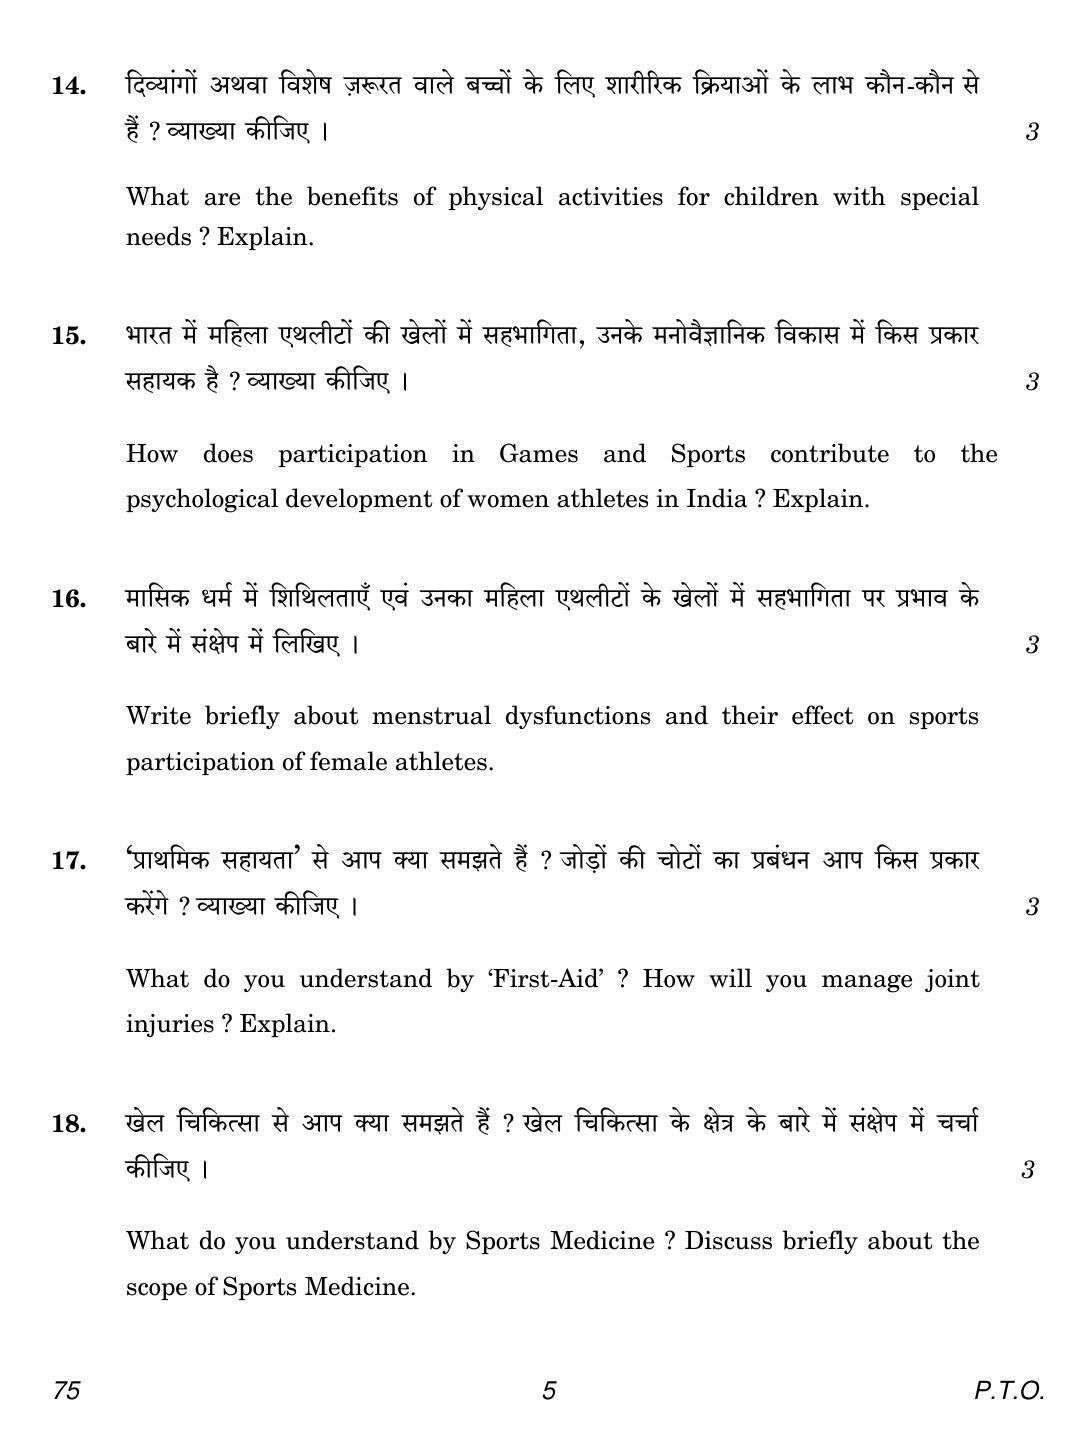 CBSE Class 12 75 Physical Education 2018 Question Paper - Page 5